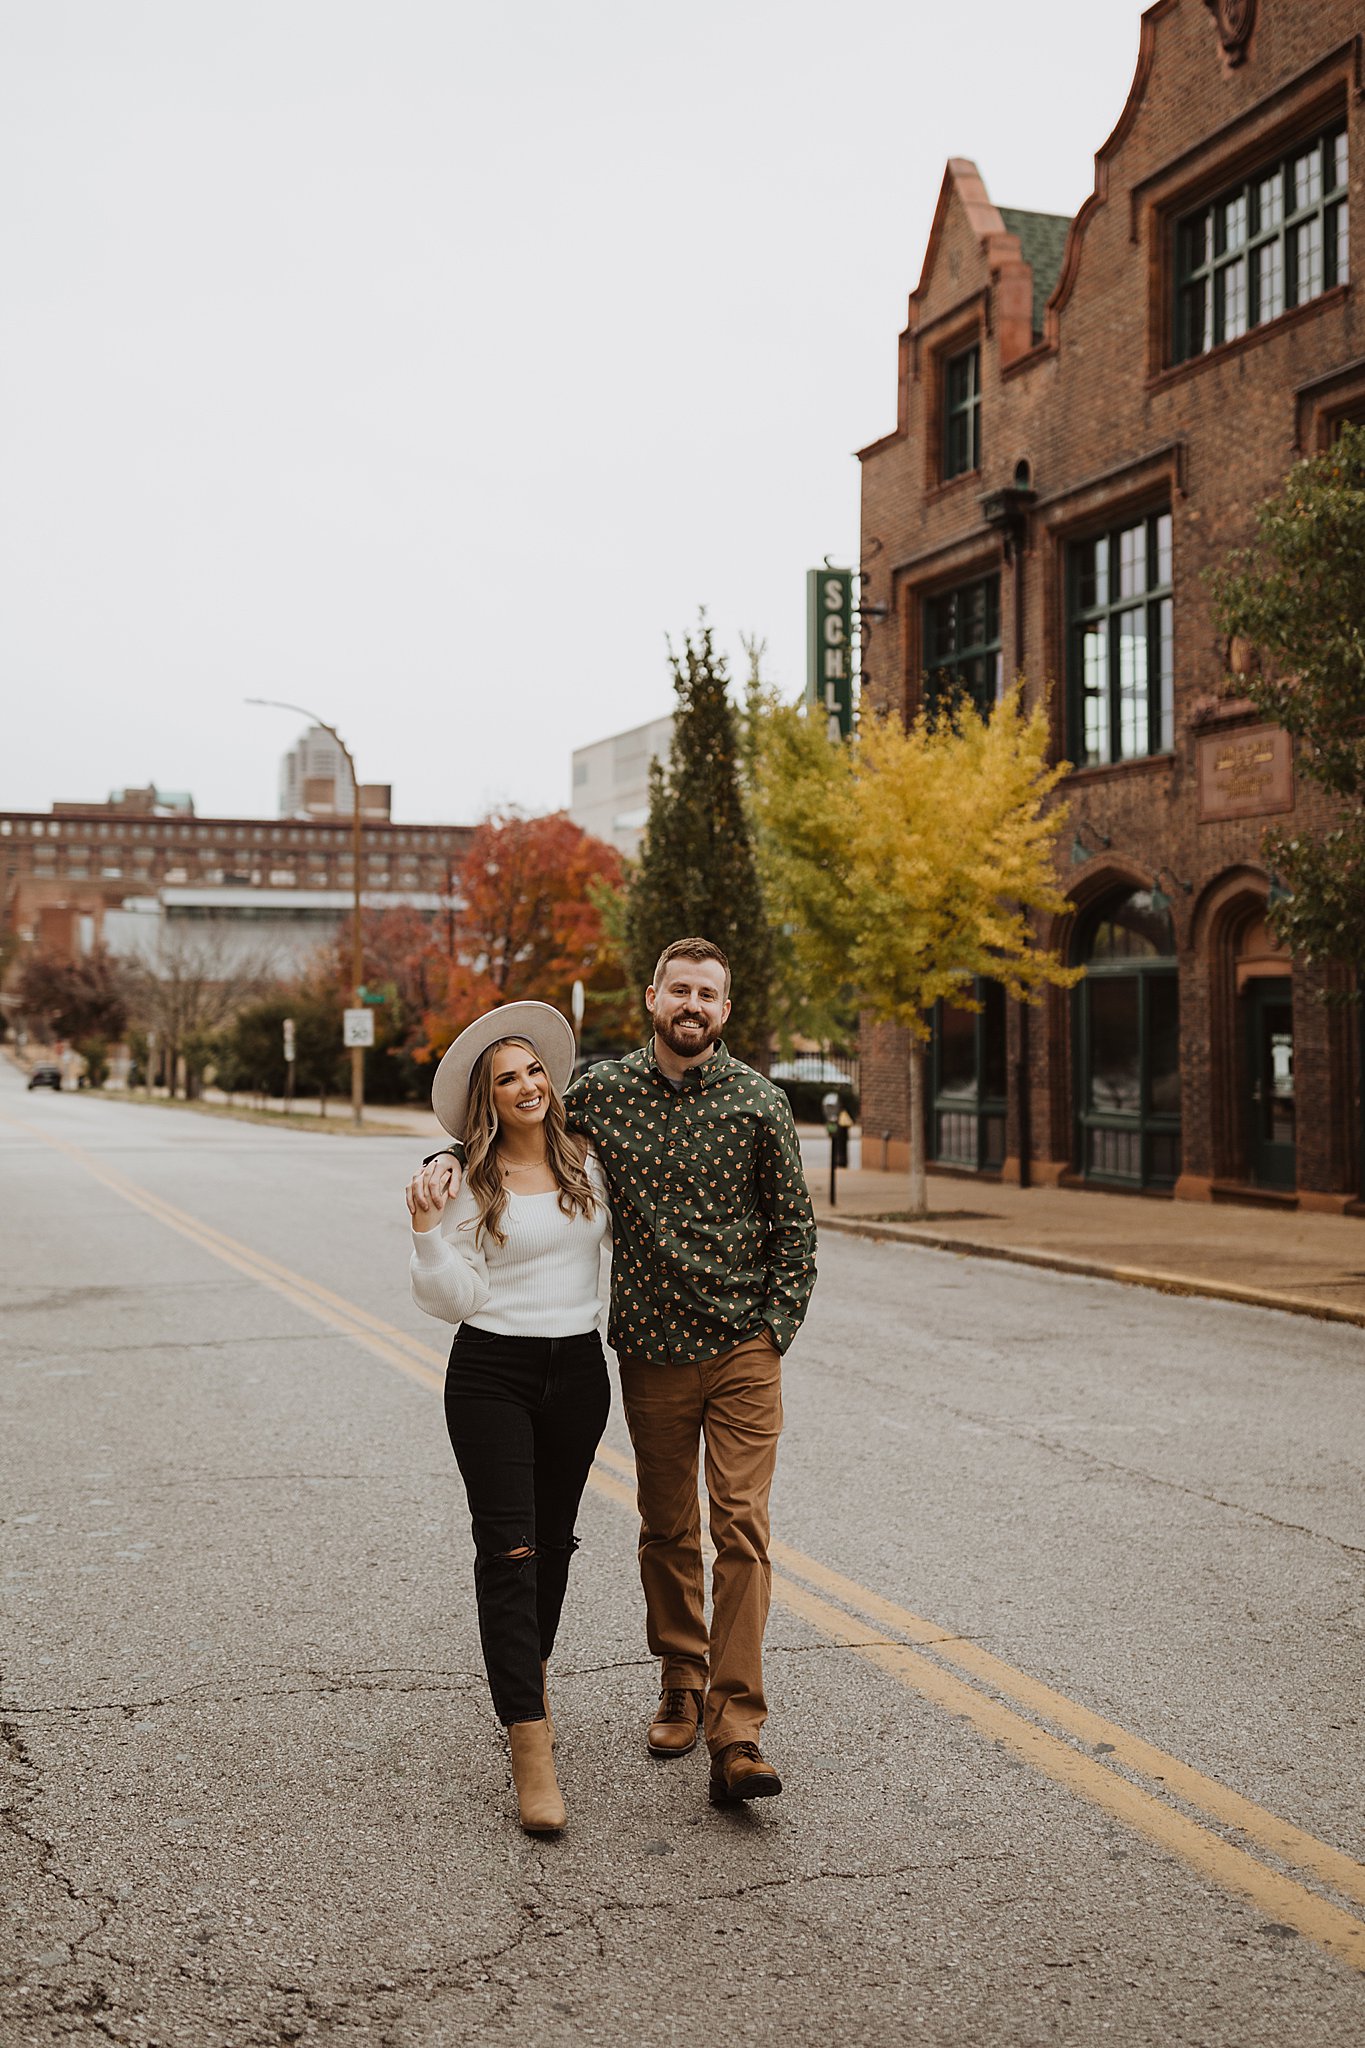 Schlafly Beer STL Engagement Photos